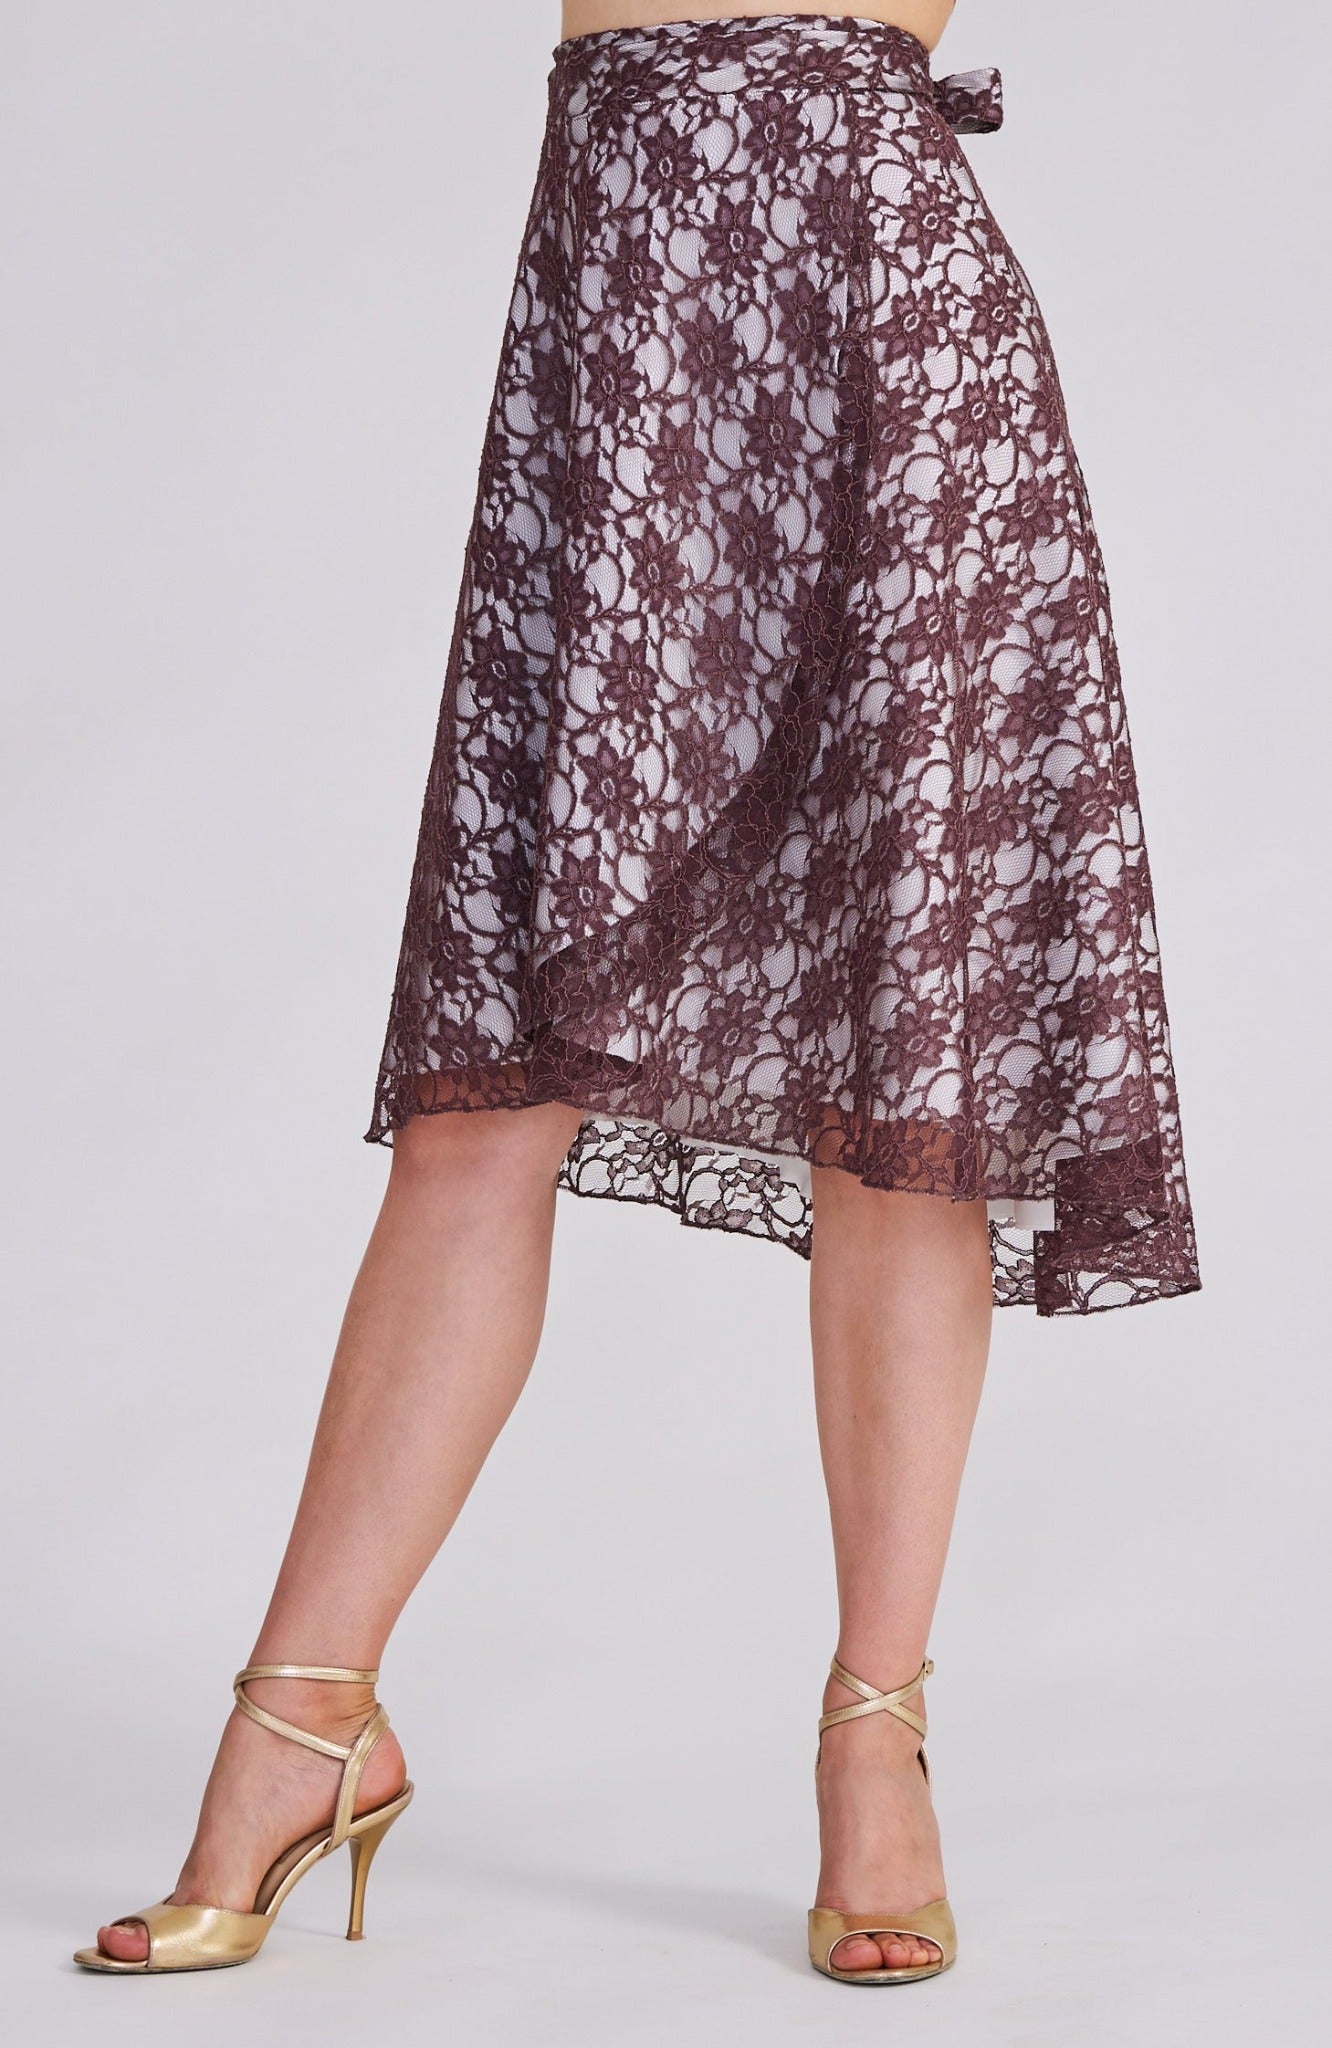 Lace Tango Skirt in Chocolate Brown 